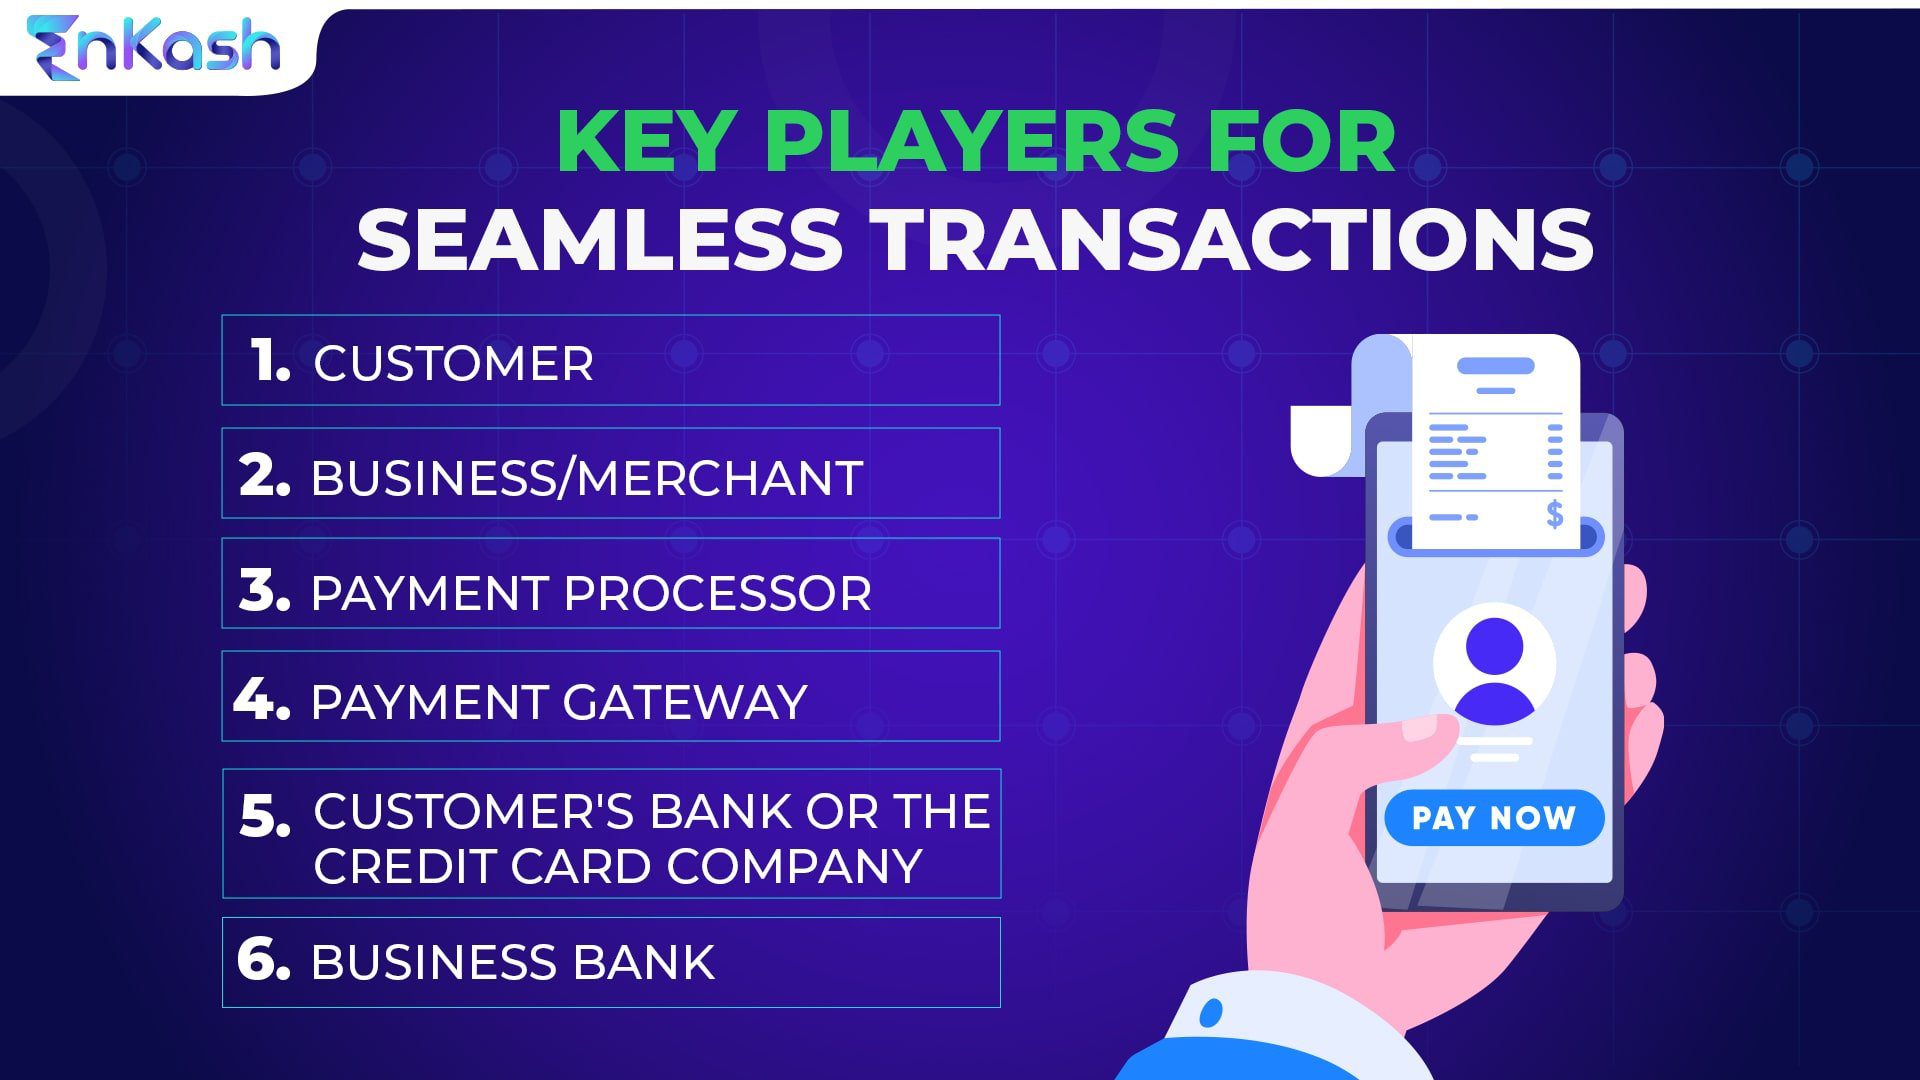 Key players for seamless transactions